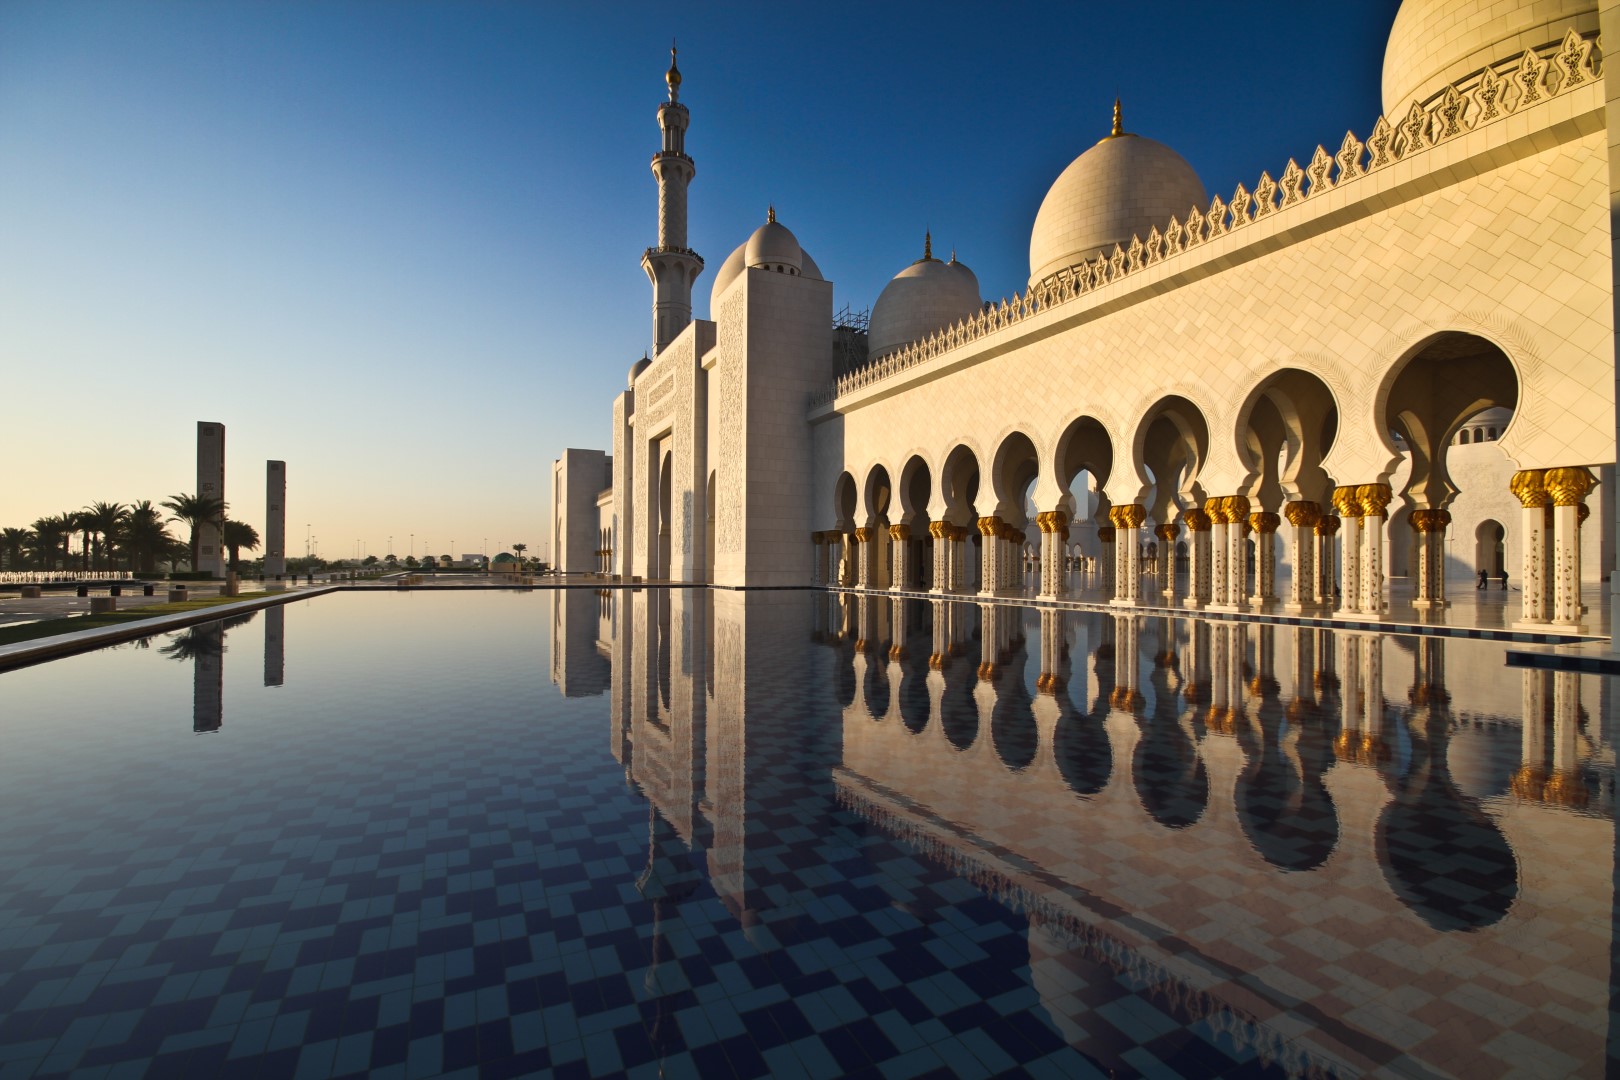 ‘Art And Architecture Series’ Showcases Distinct Features Of Sheikh Zayed Grand Mosque